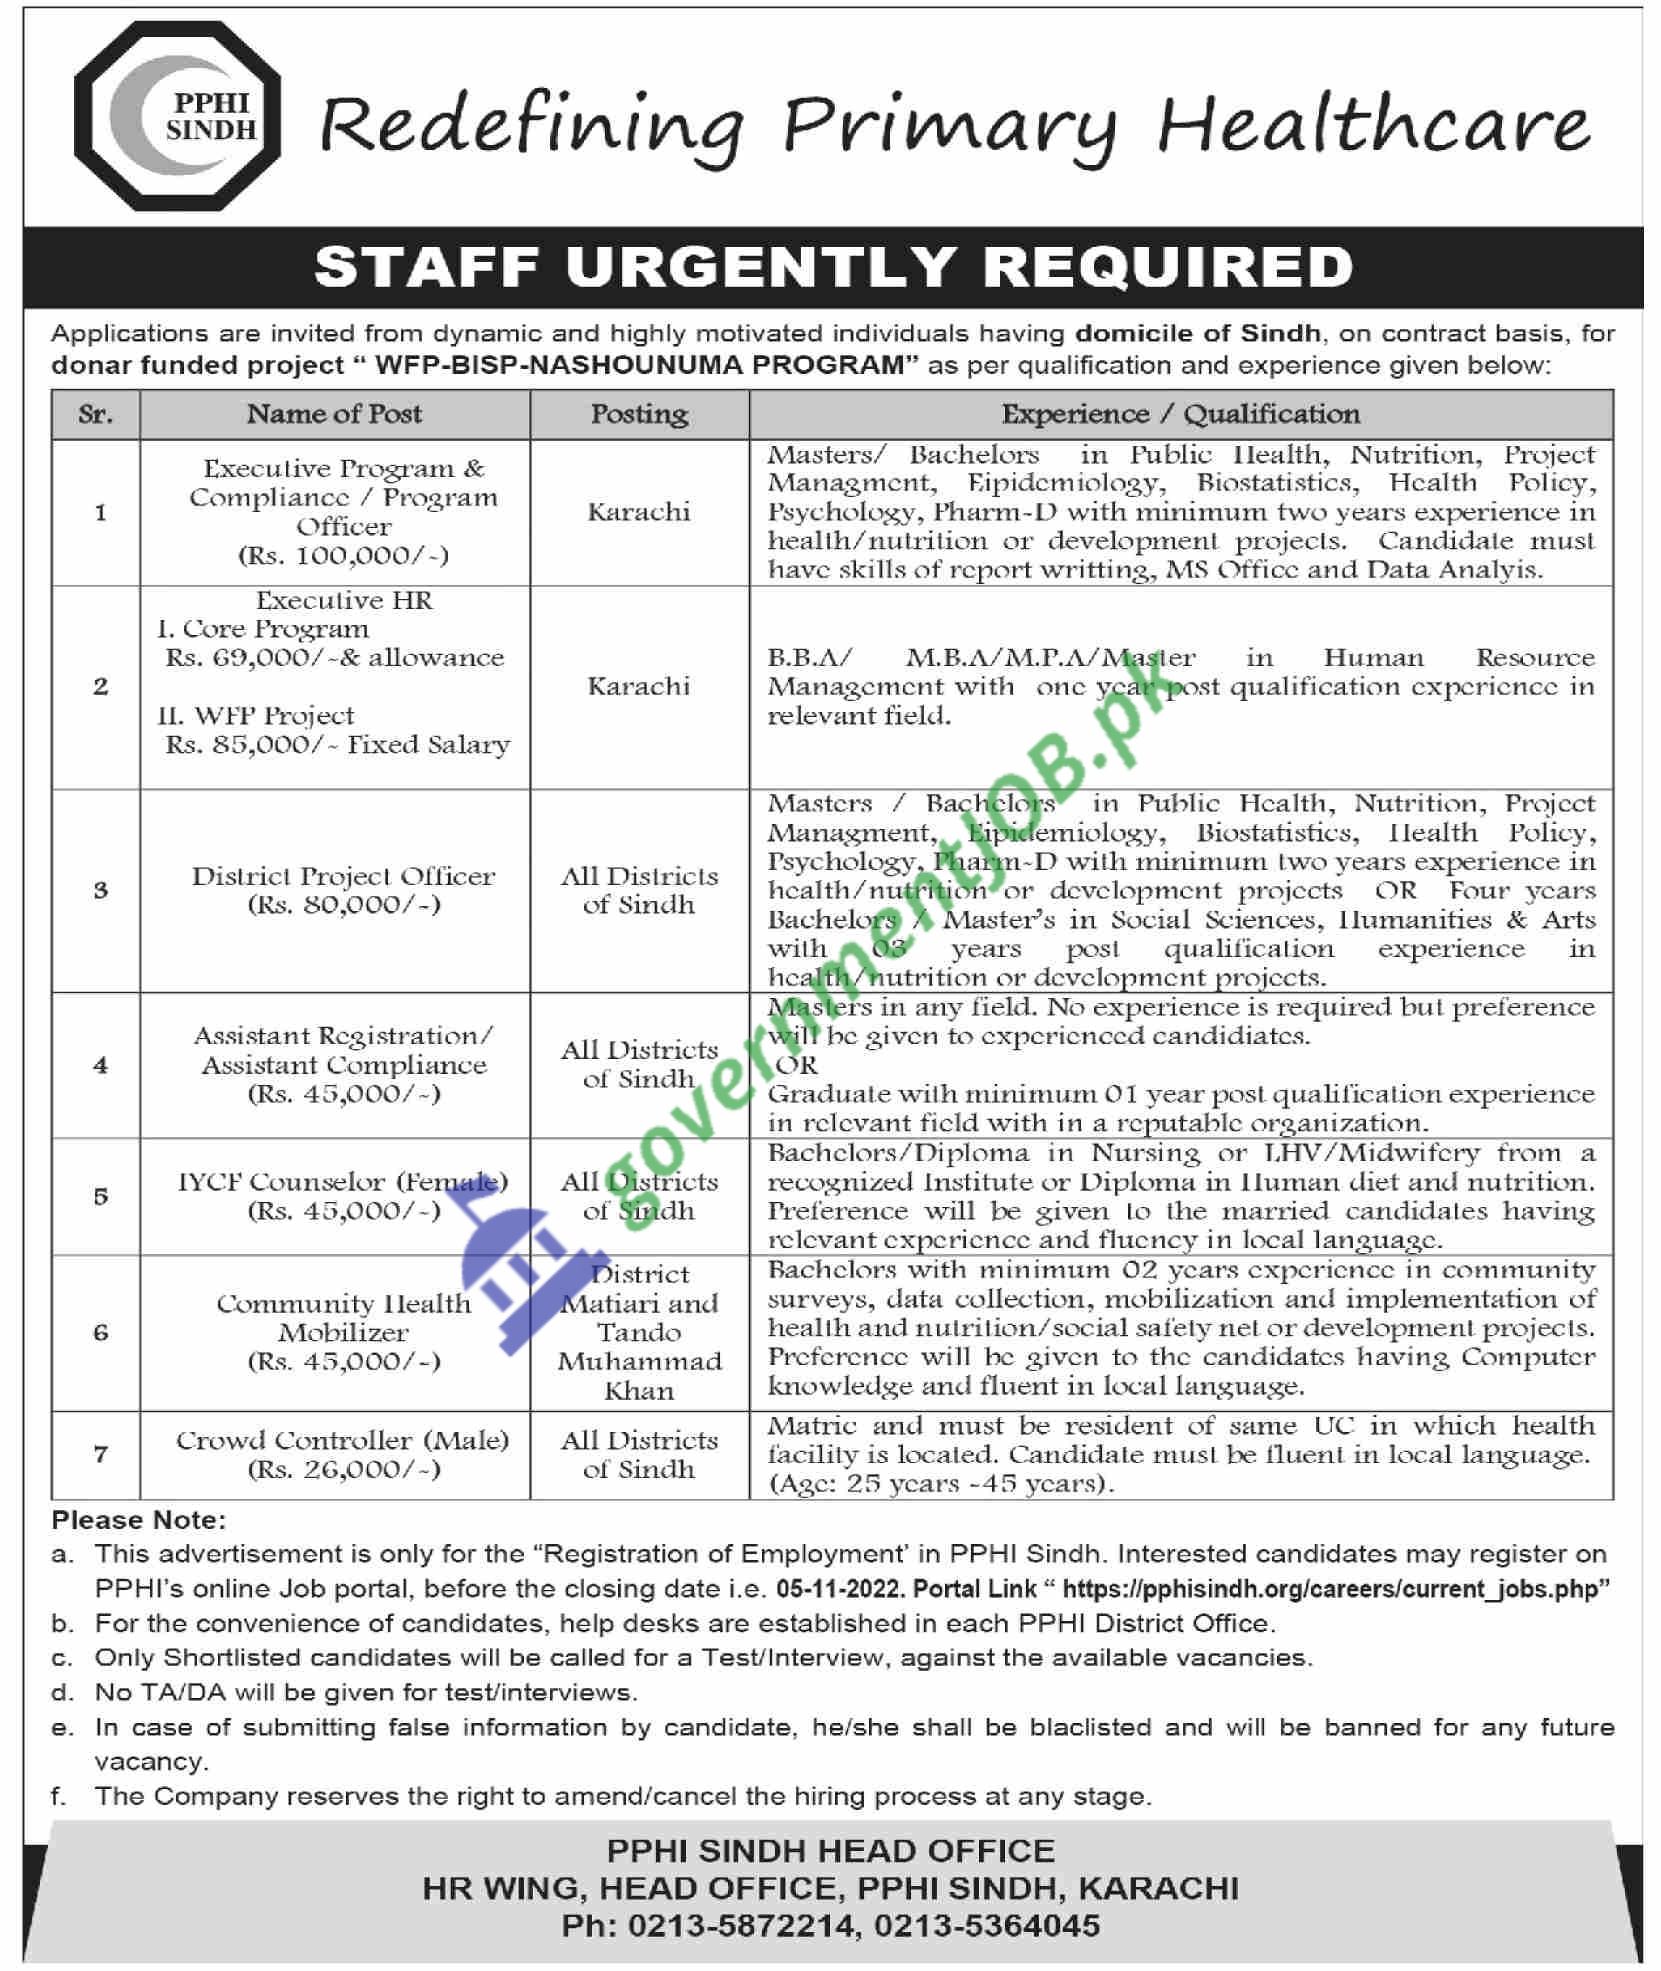 New PPHI Sindh Jobs 2022 – People’s Primary Healthcare Initiative